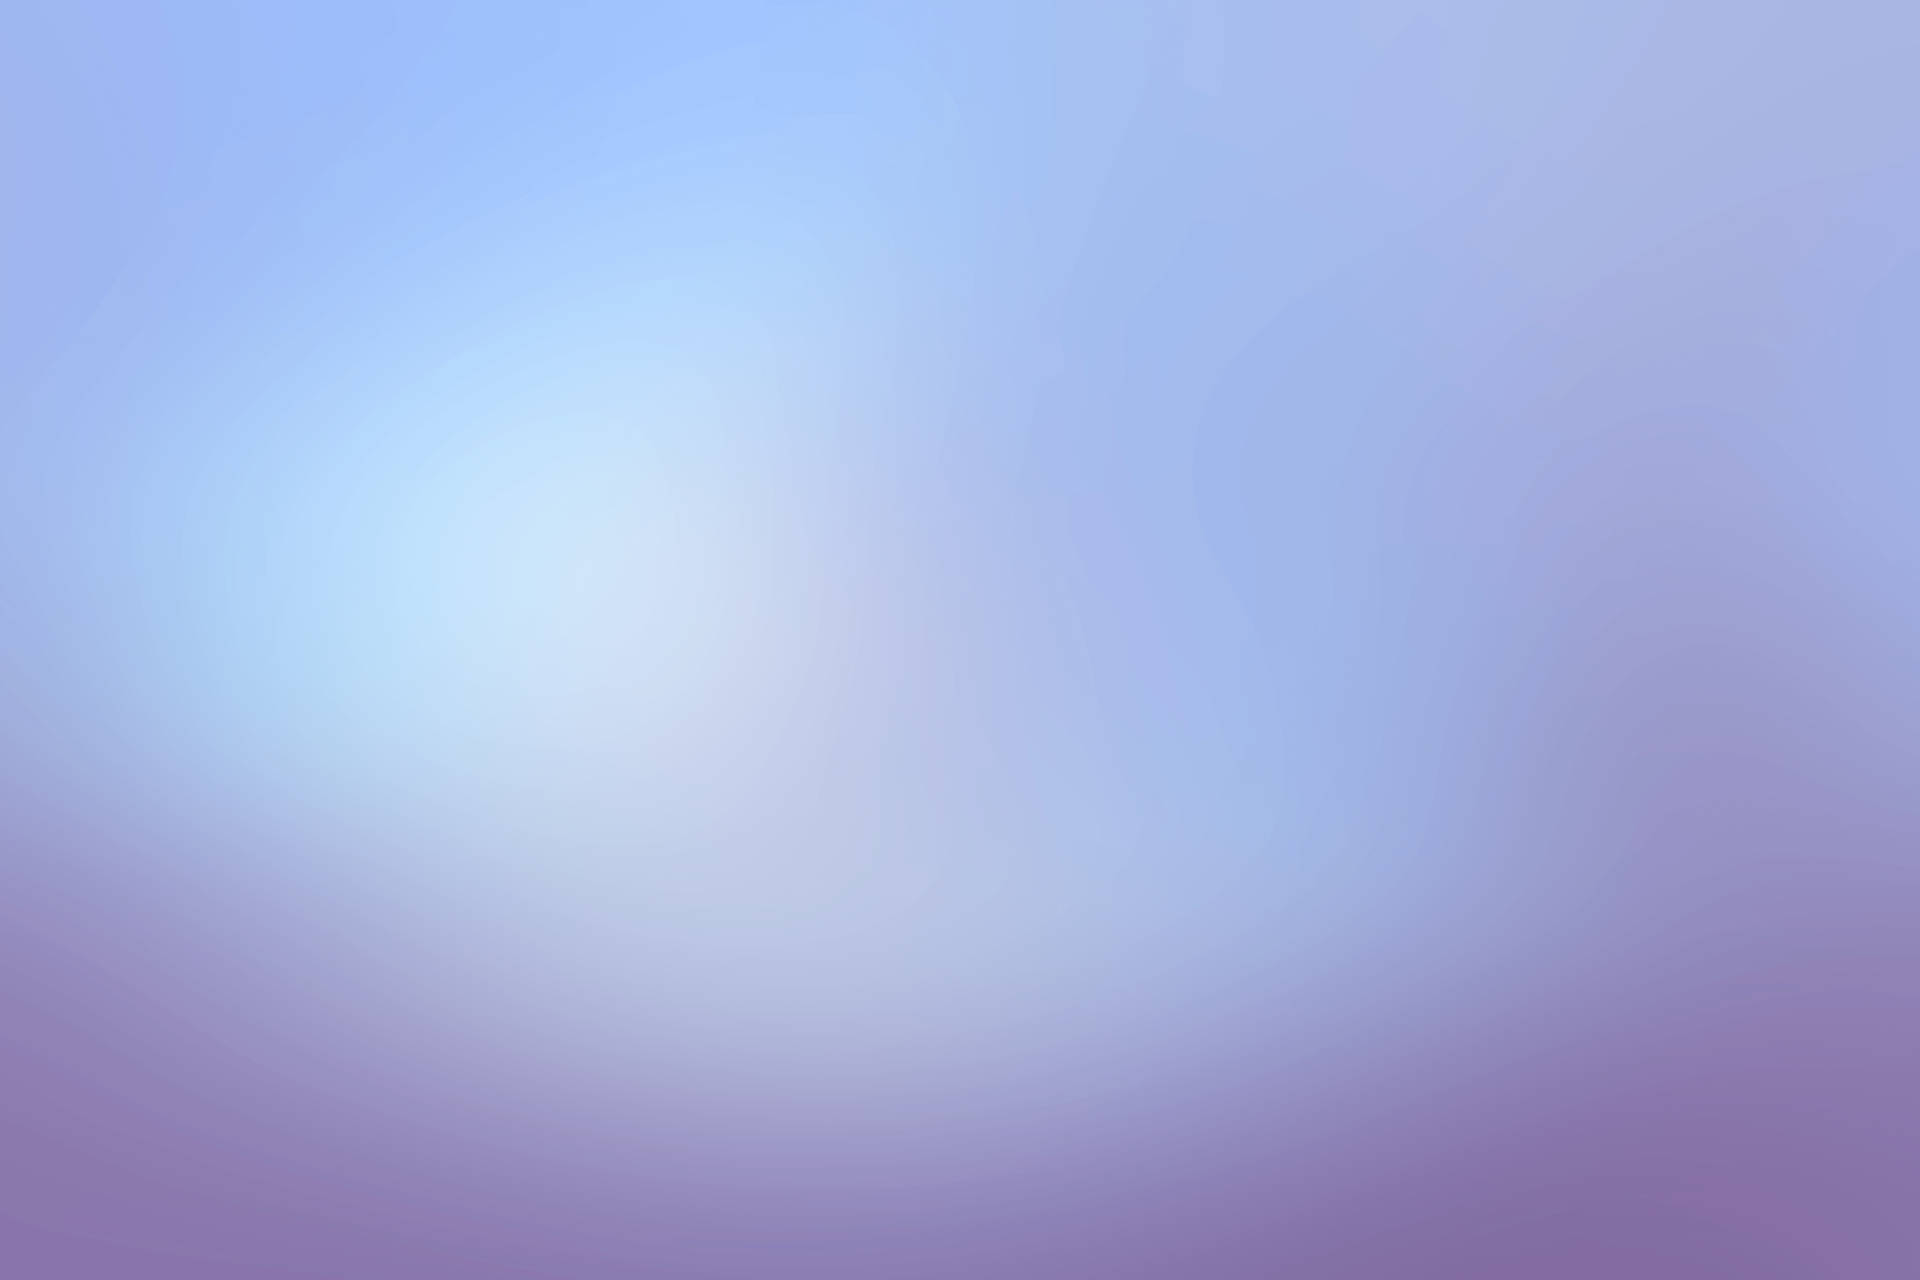 A Blurry Purple And Blue Background Wallpaper